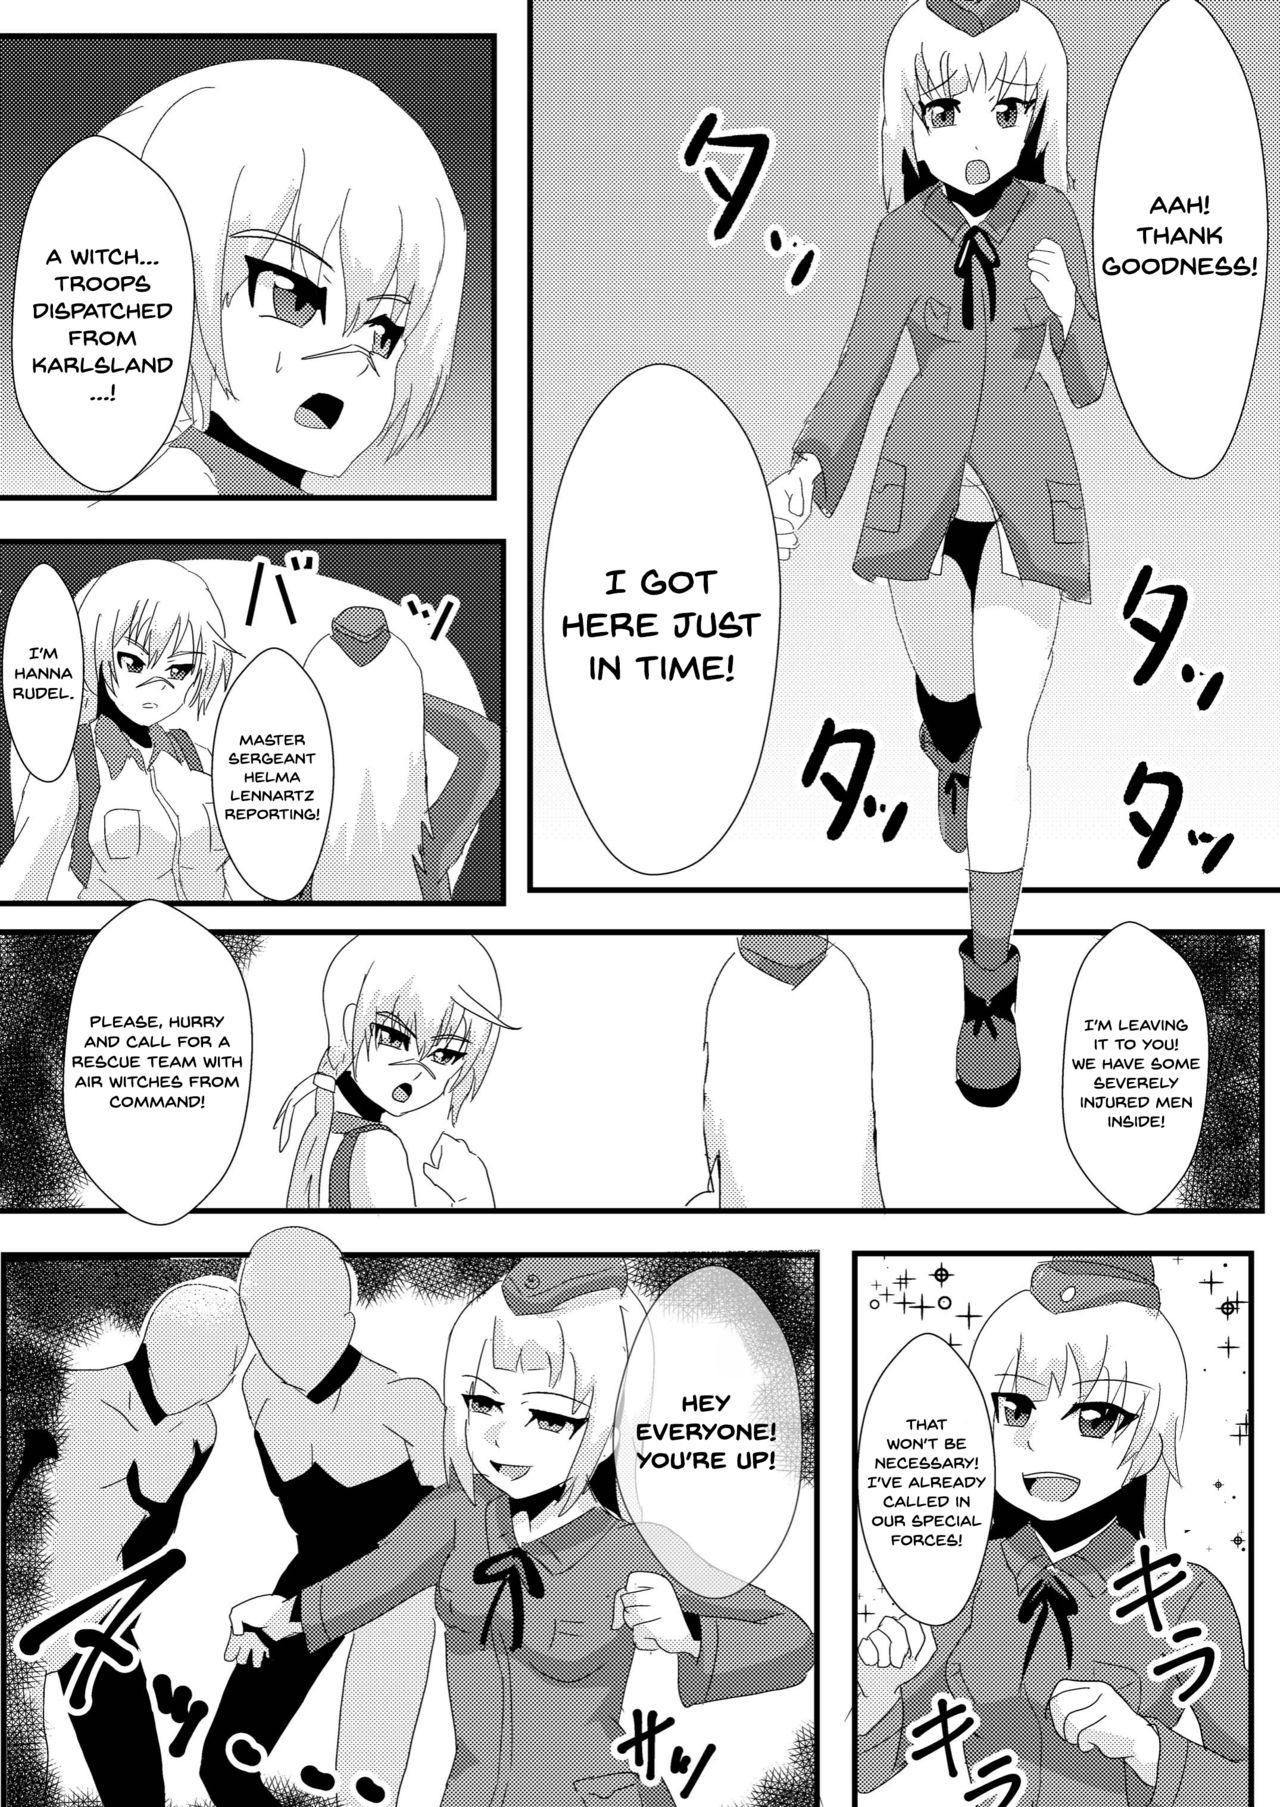 Plug Parasite Witches 2 - Strike witches Chileno - Page 7